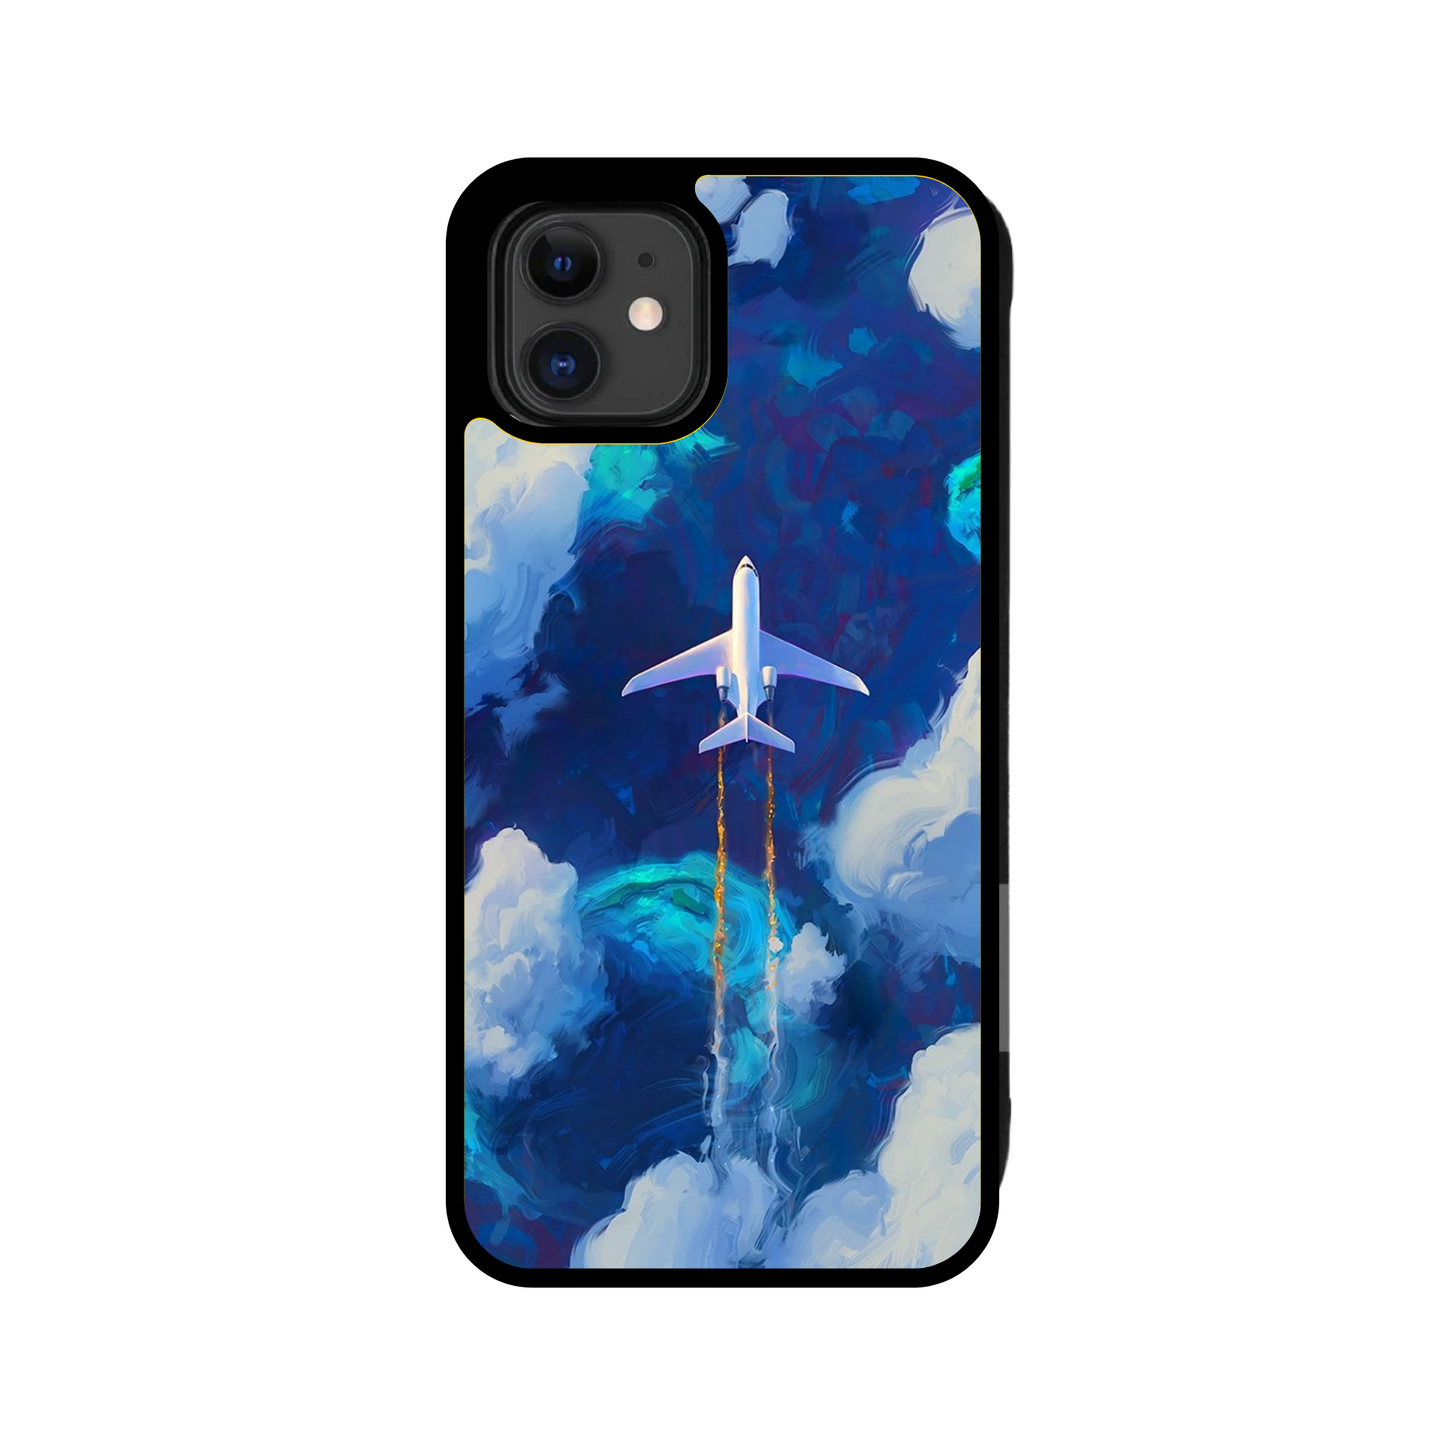 Plane and Clouds Case